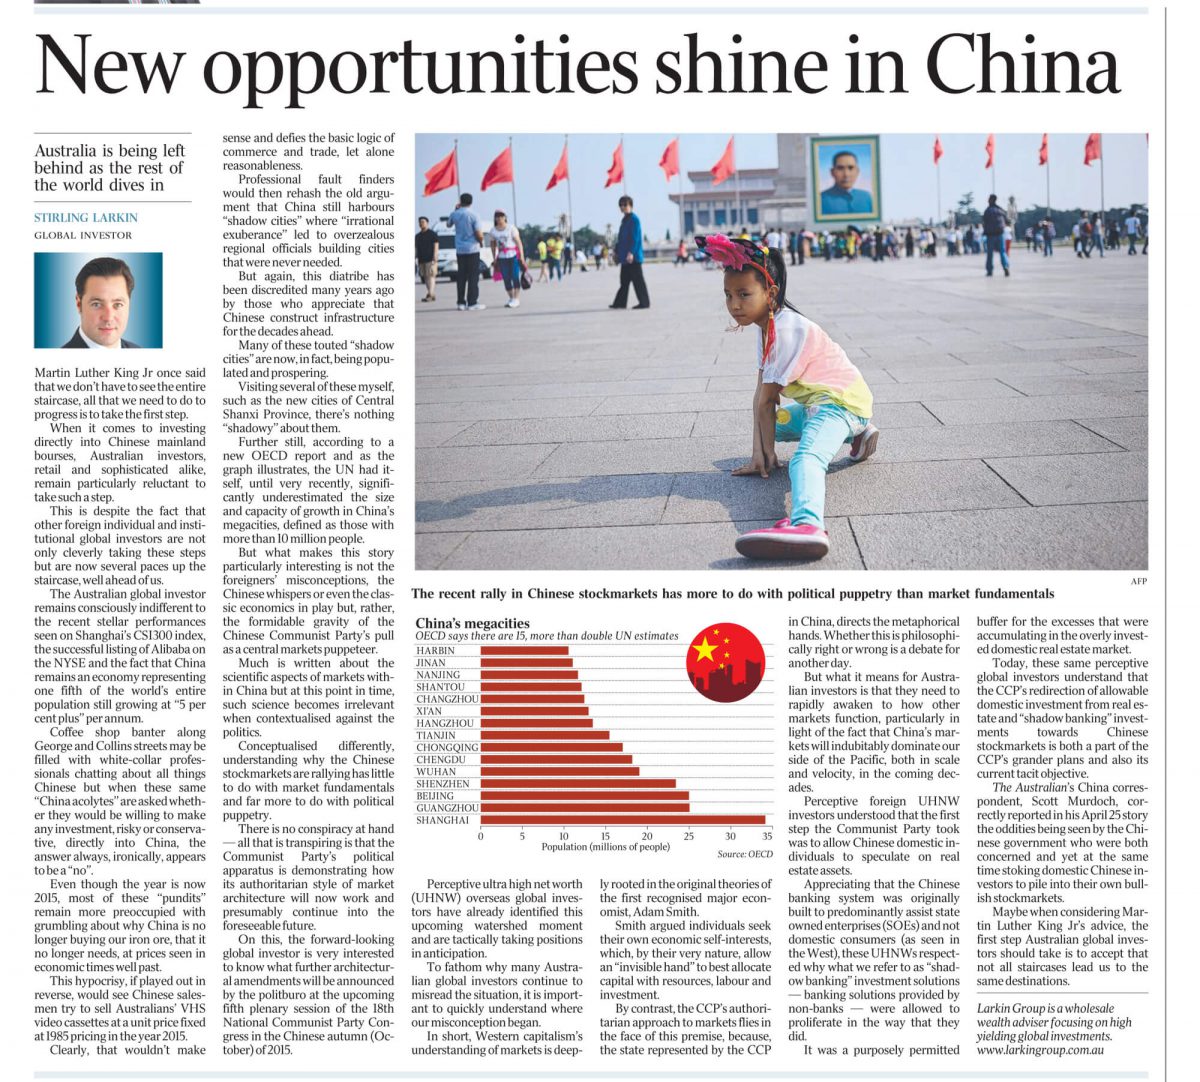 australian standfirst discusses markets in china 2015 in the australian newspaper